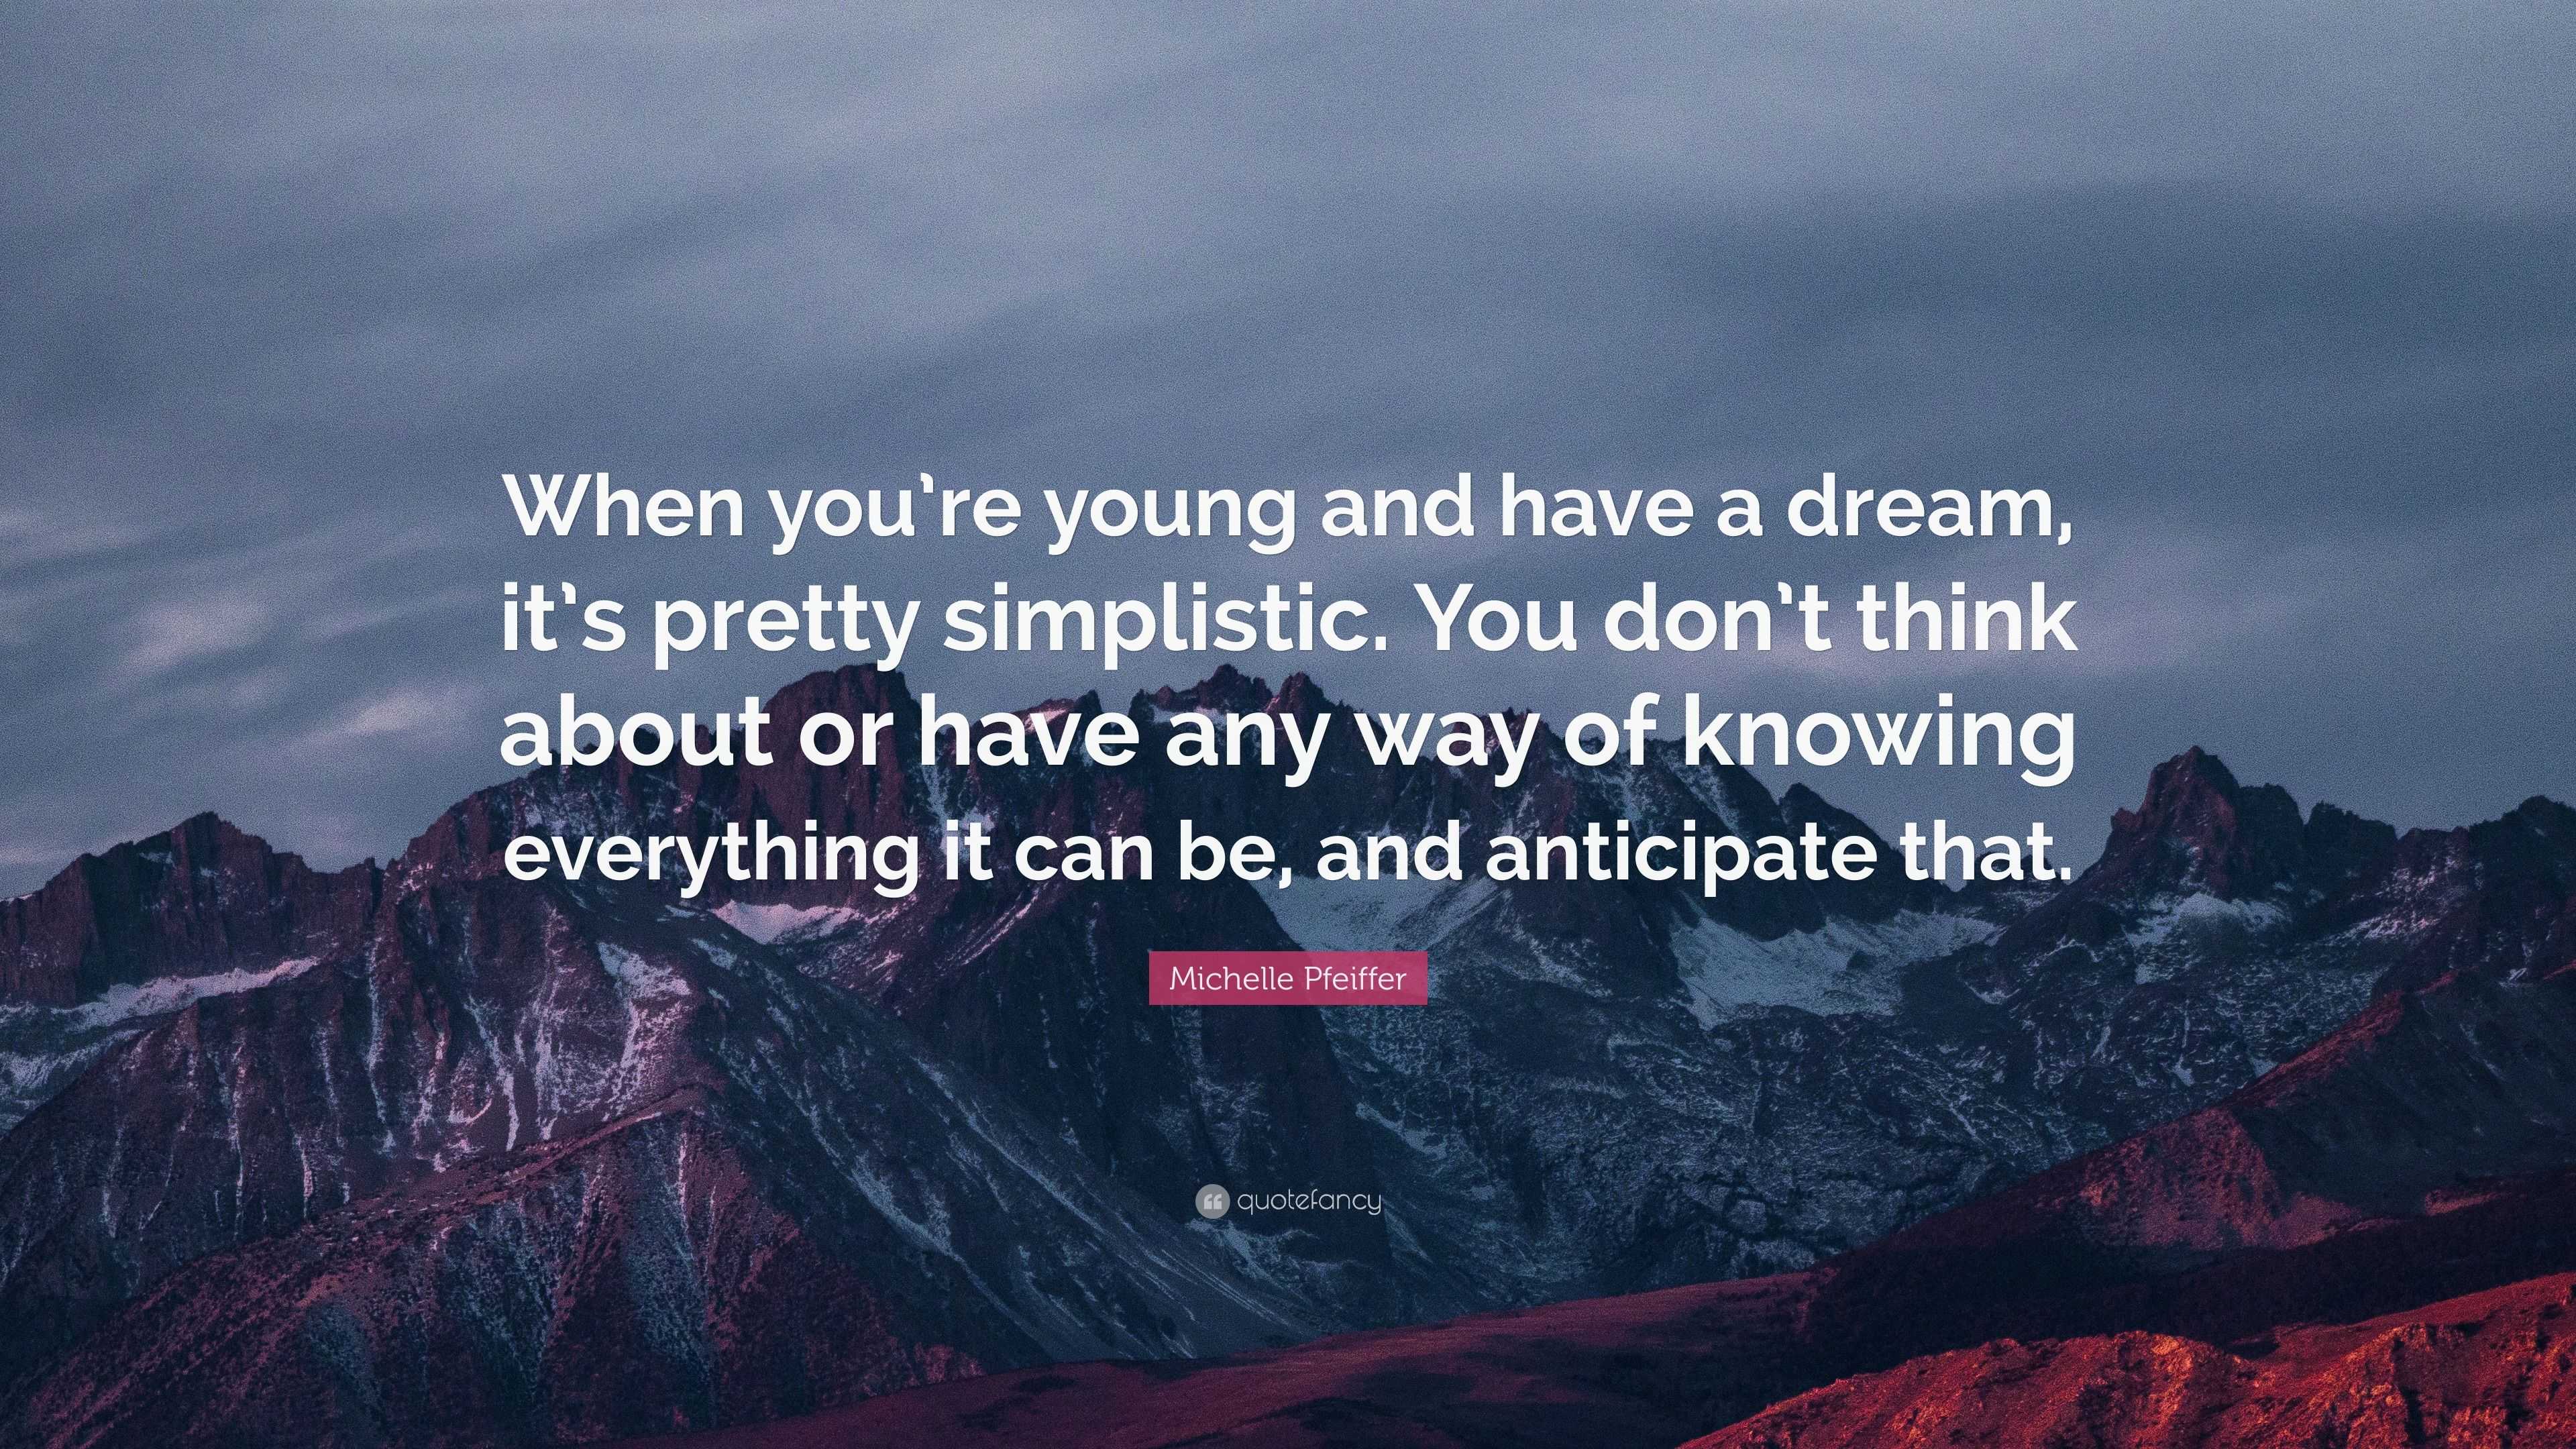 Michelle Pfeiffer Quote: “When you’re young and have a dream, it’s ...